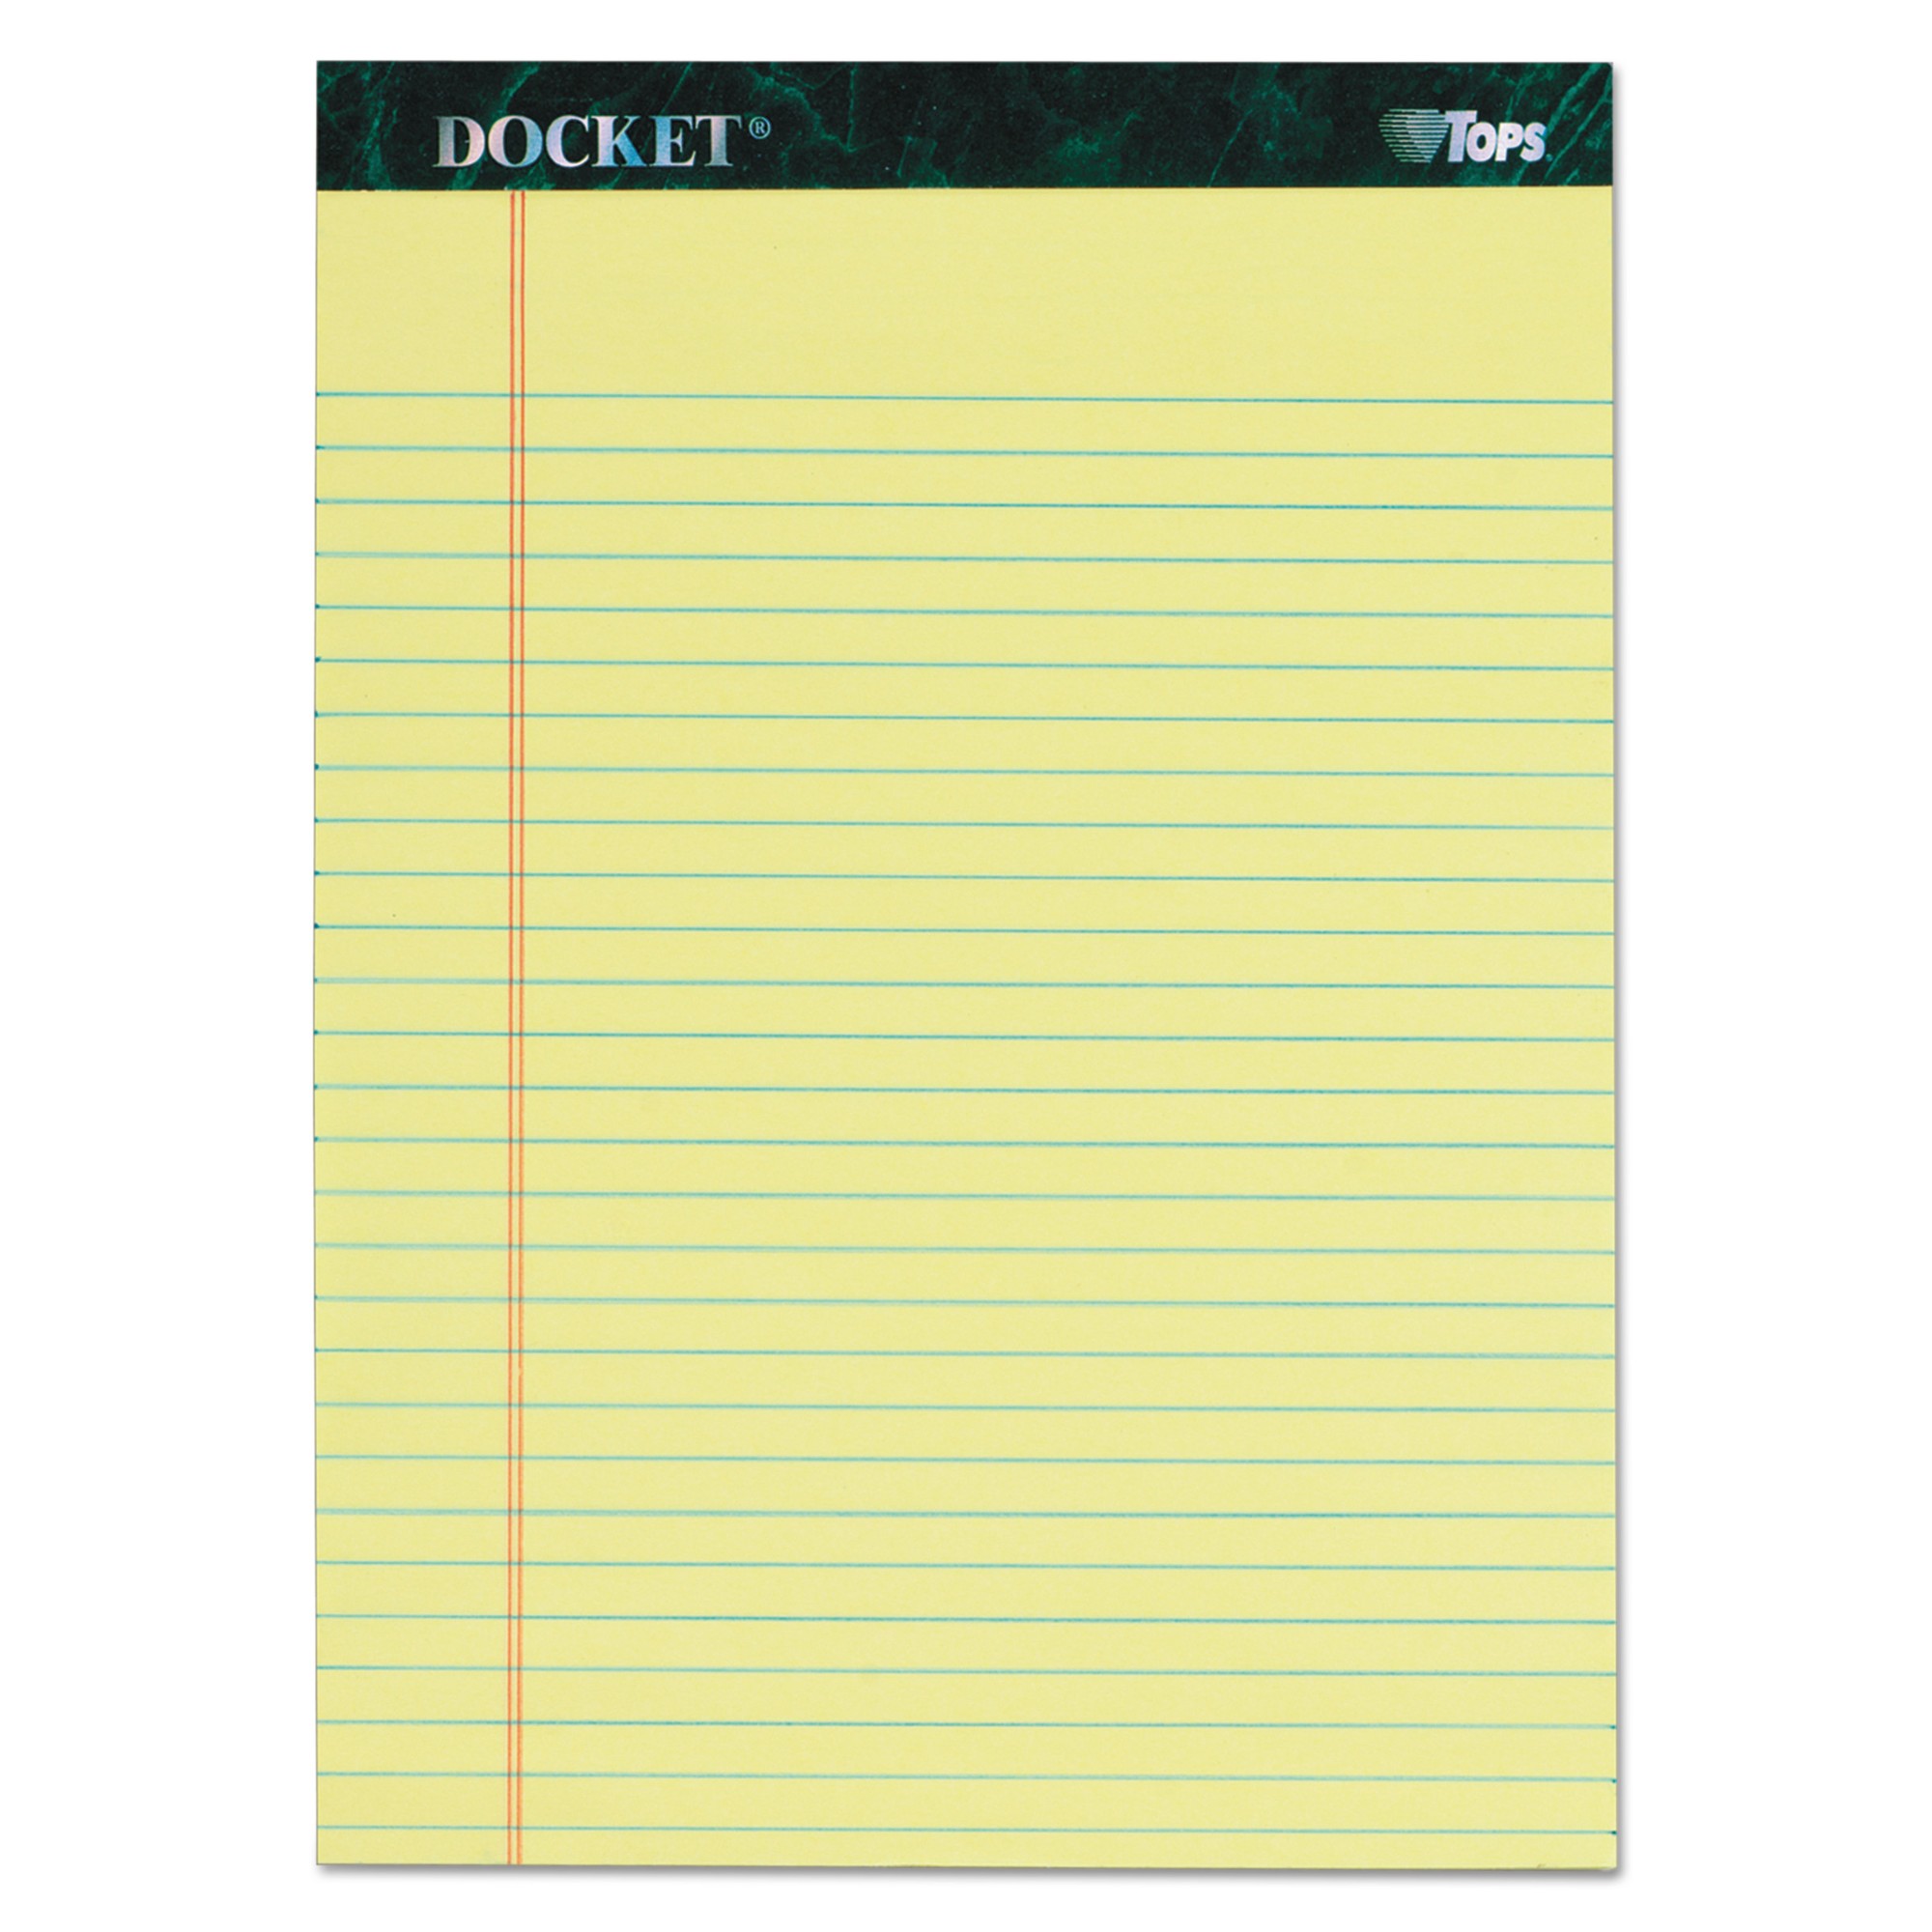 TOPS Docket Legal Rule Writing Pads - 50 Sheets - Double Stitched - 16 lb Basis Weight - 8 1/2" x 11 3/4" - 11.75" x 8.5" - Cana